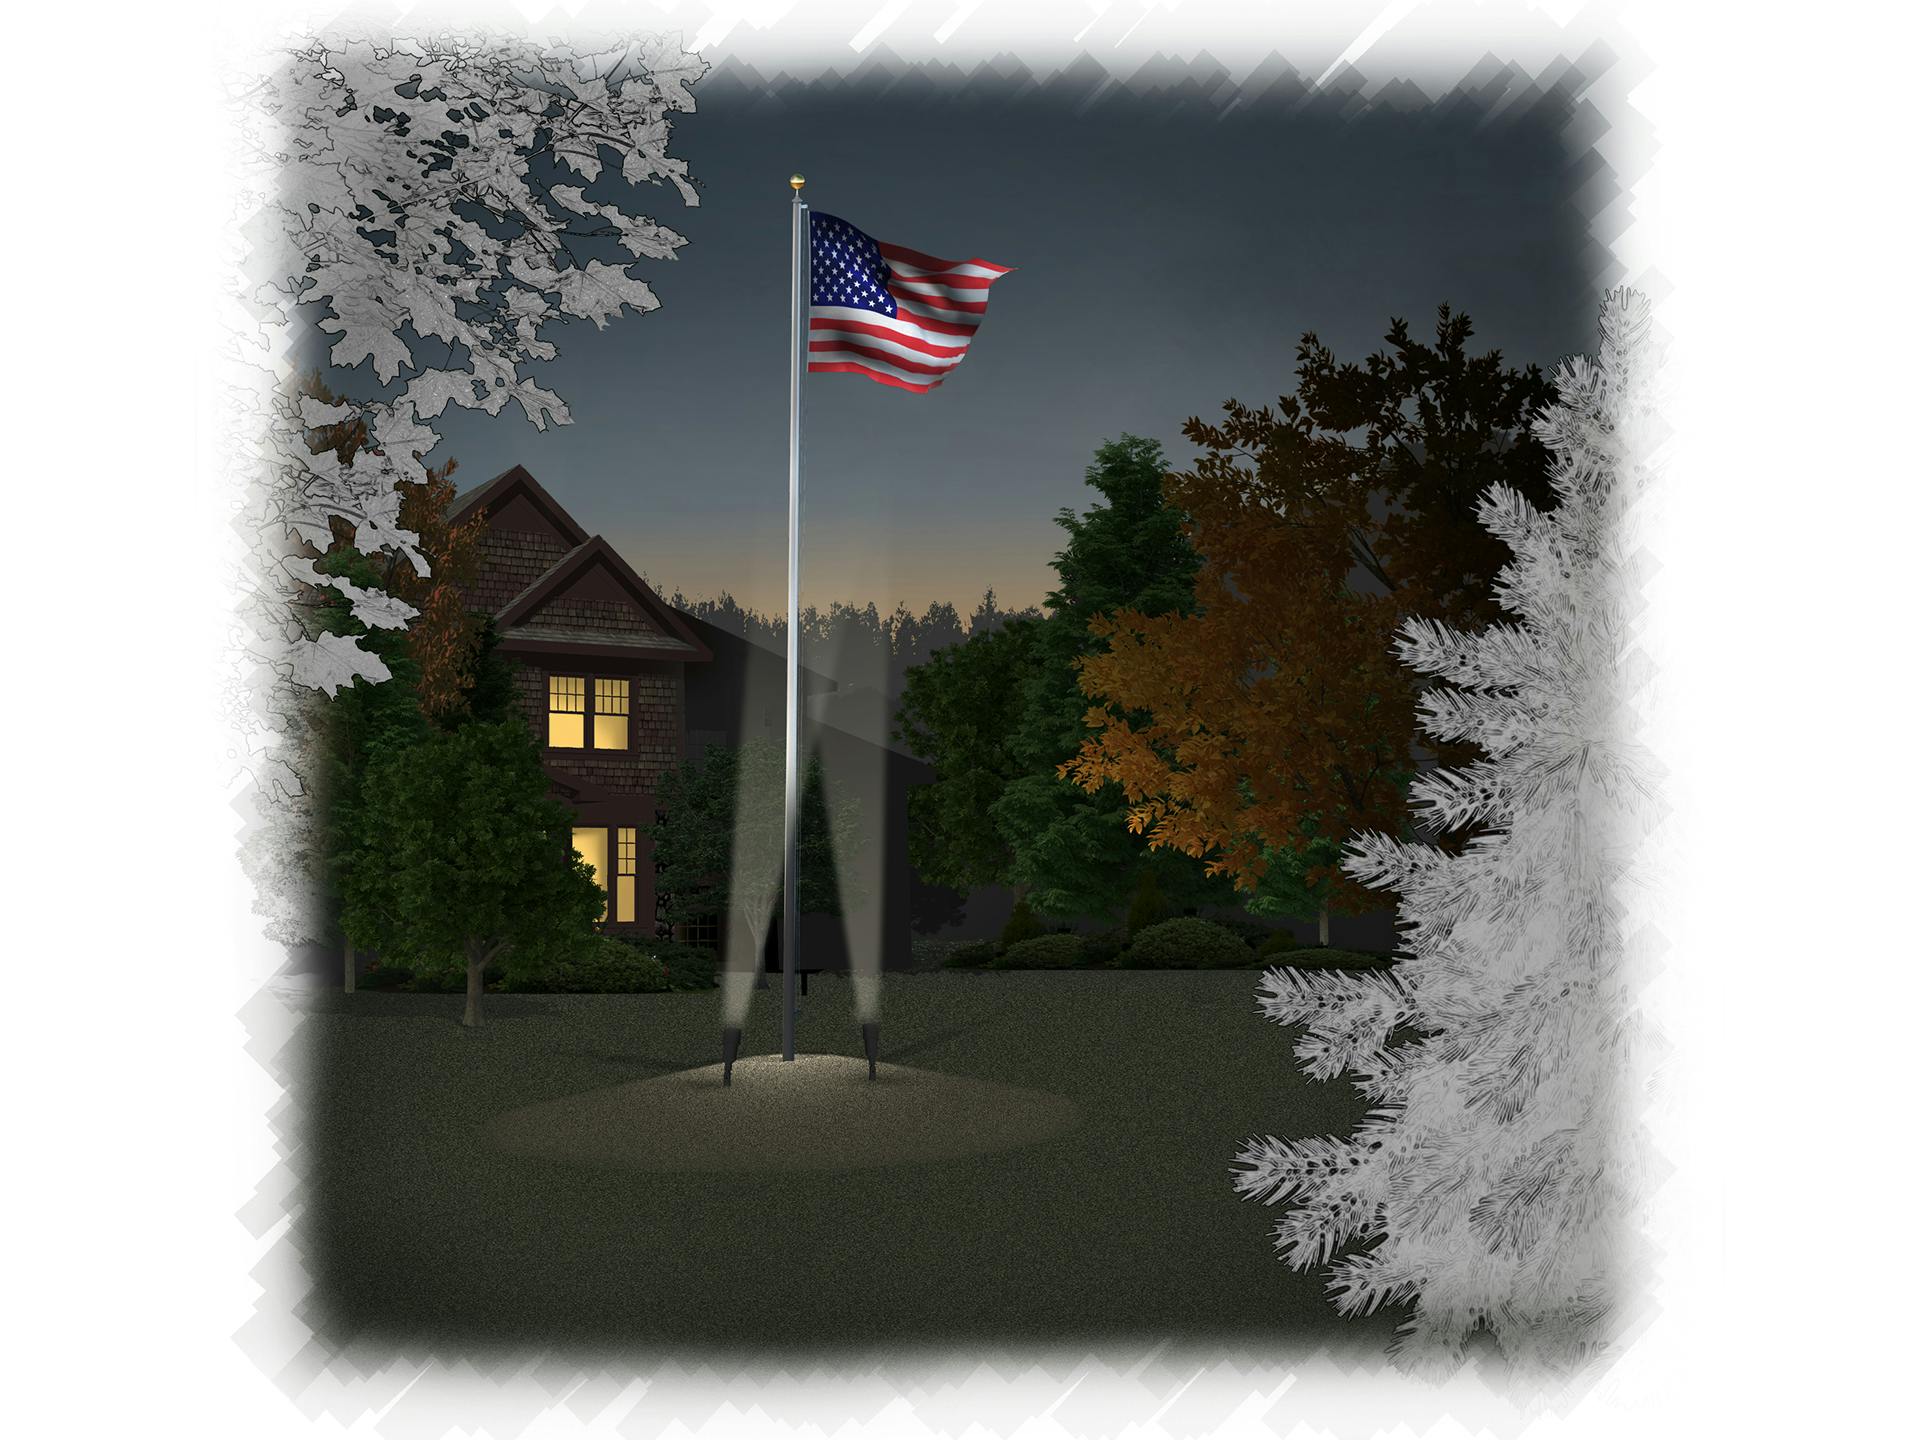 Illustration of a flagpole at night with uplighting